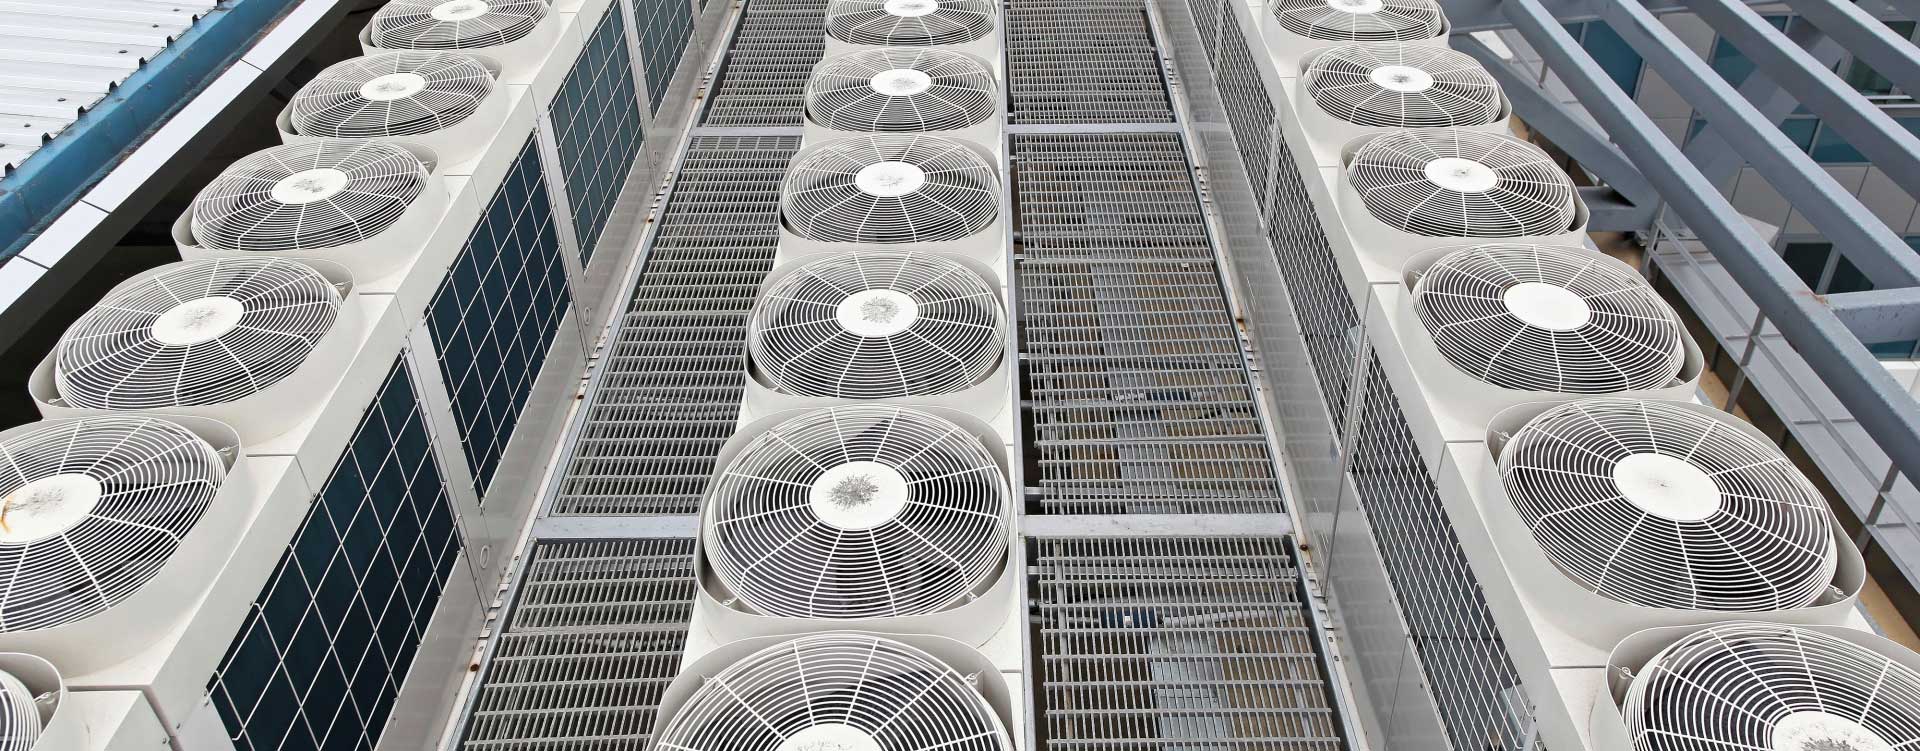 Ventilation and air conditioning systems